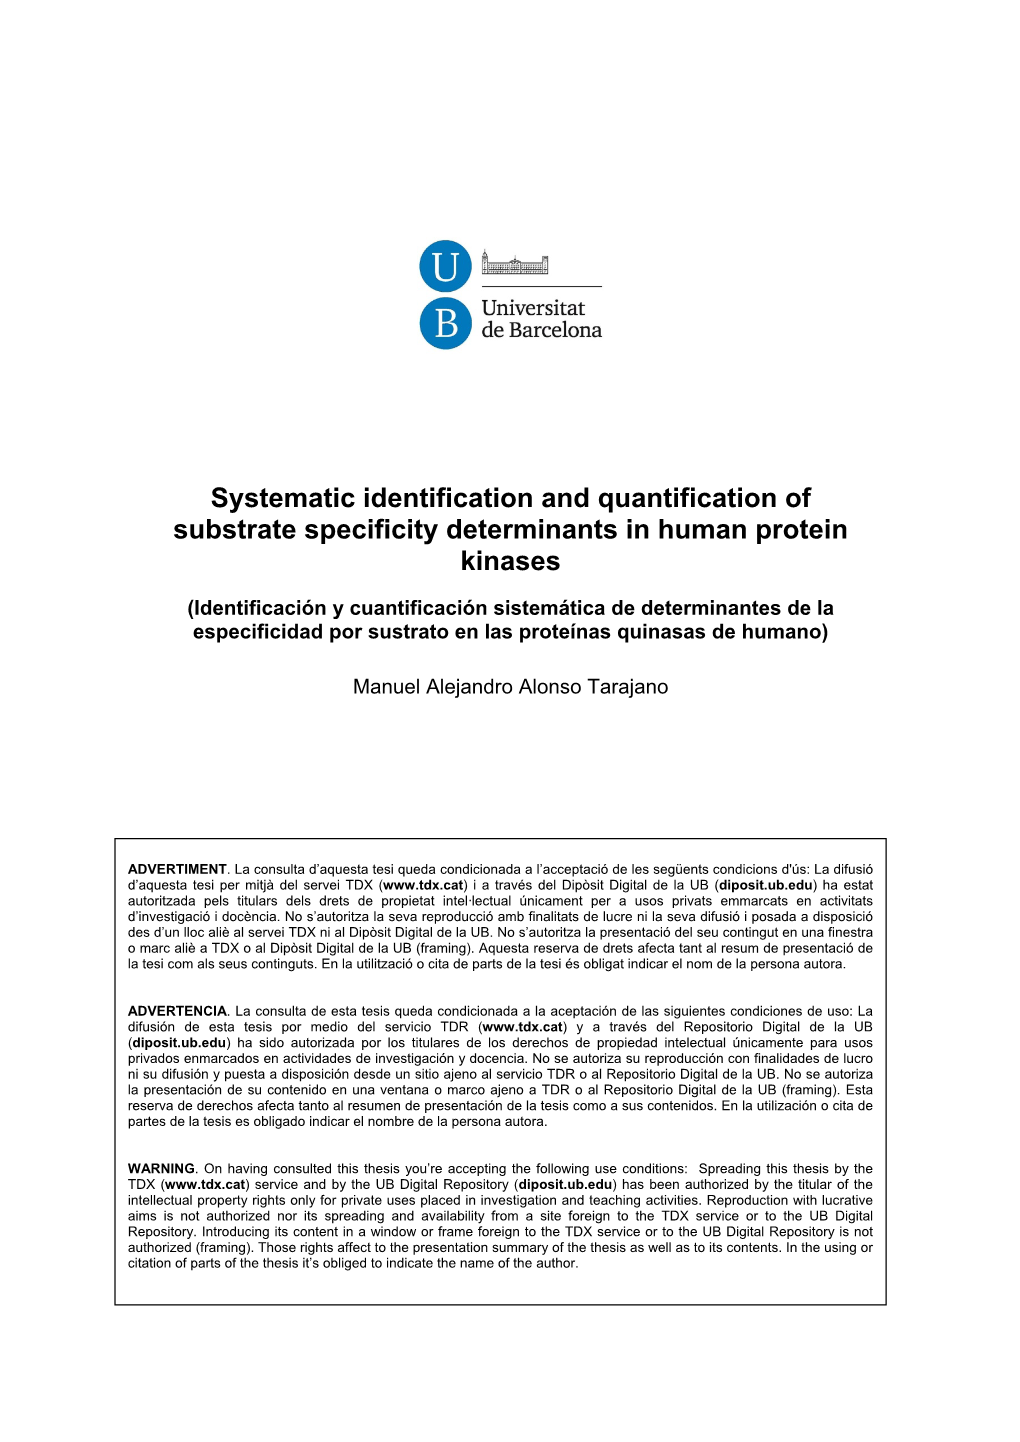 Systematic Identification and Quantification of Substrate Specificity Determinants in Human Protein Kinases